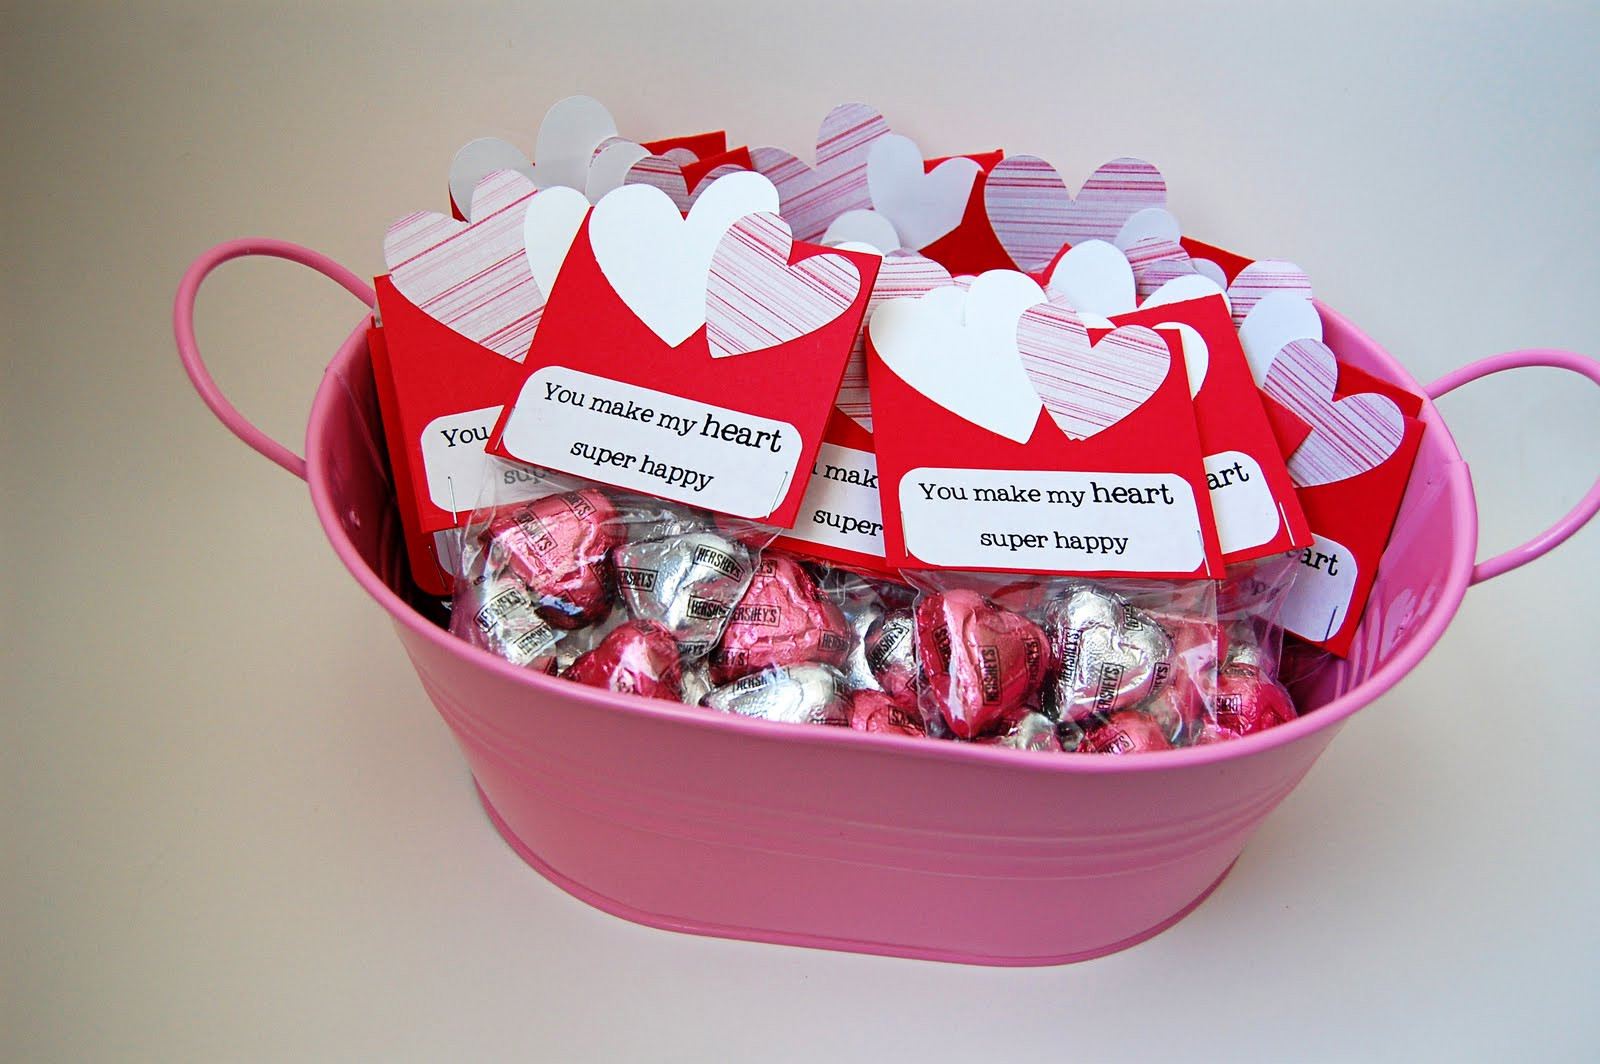 Gift Ideas Valentines Day Him
 45 Homemade Valentines Day Gift Ideas For Him